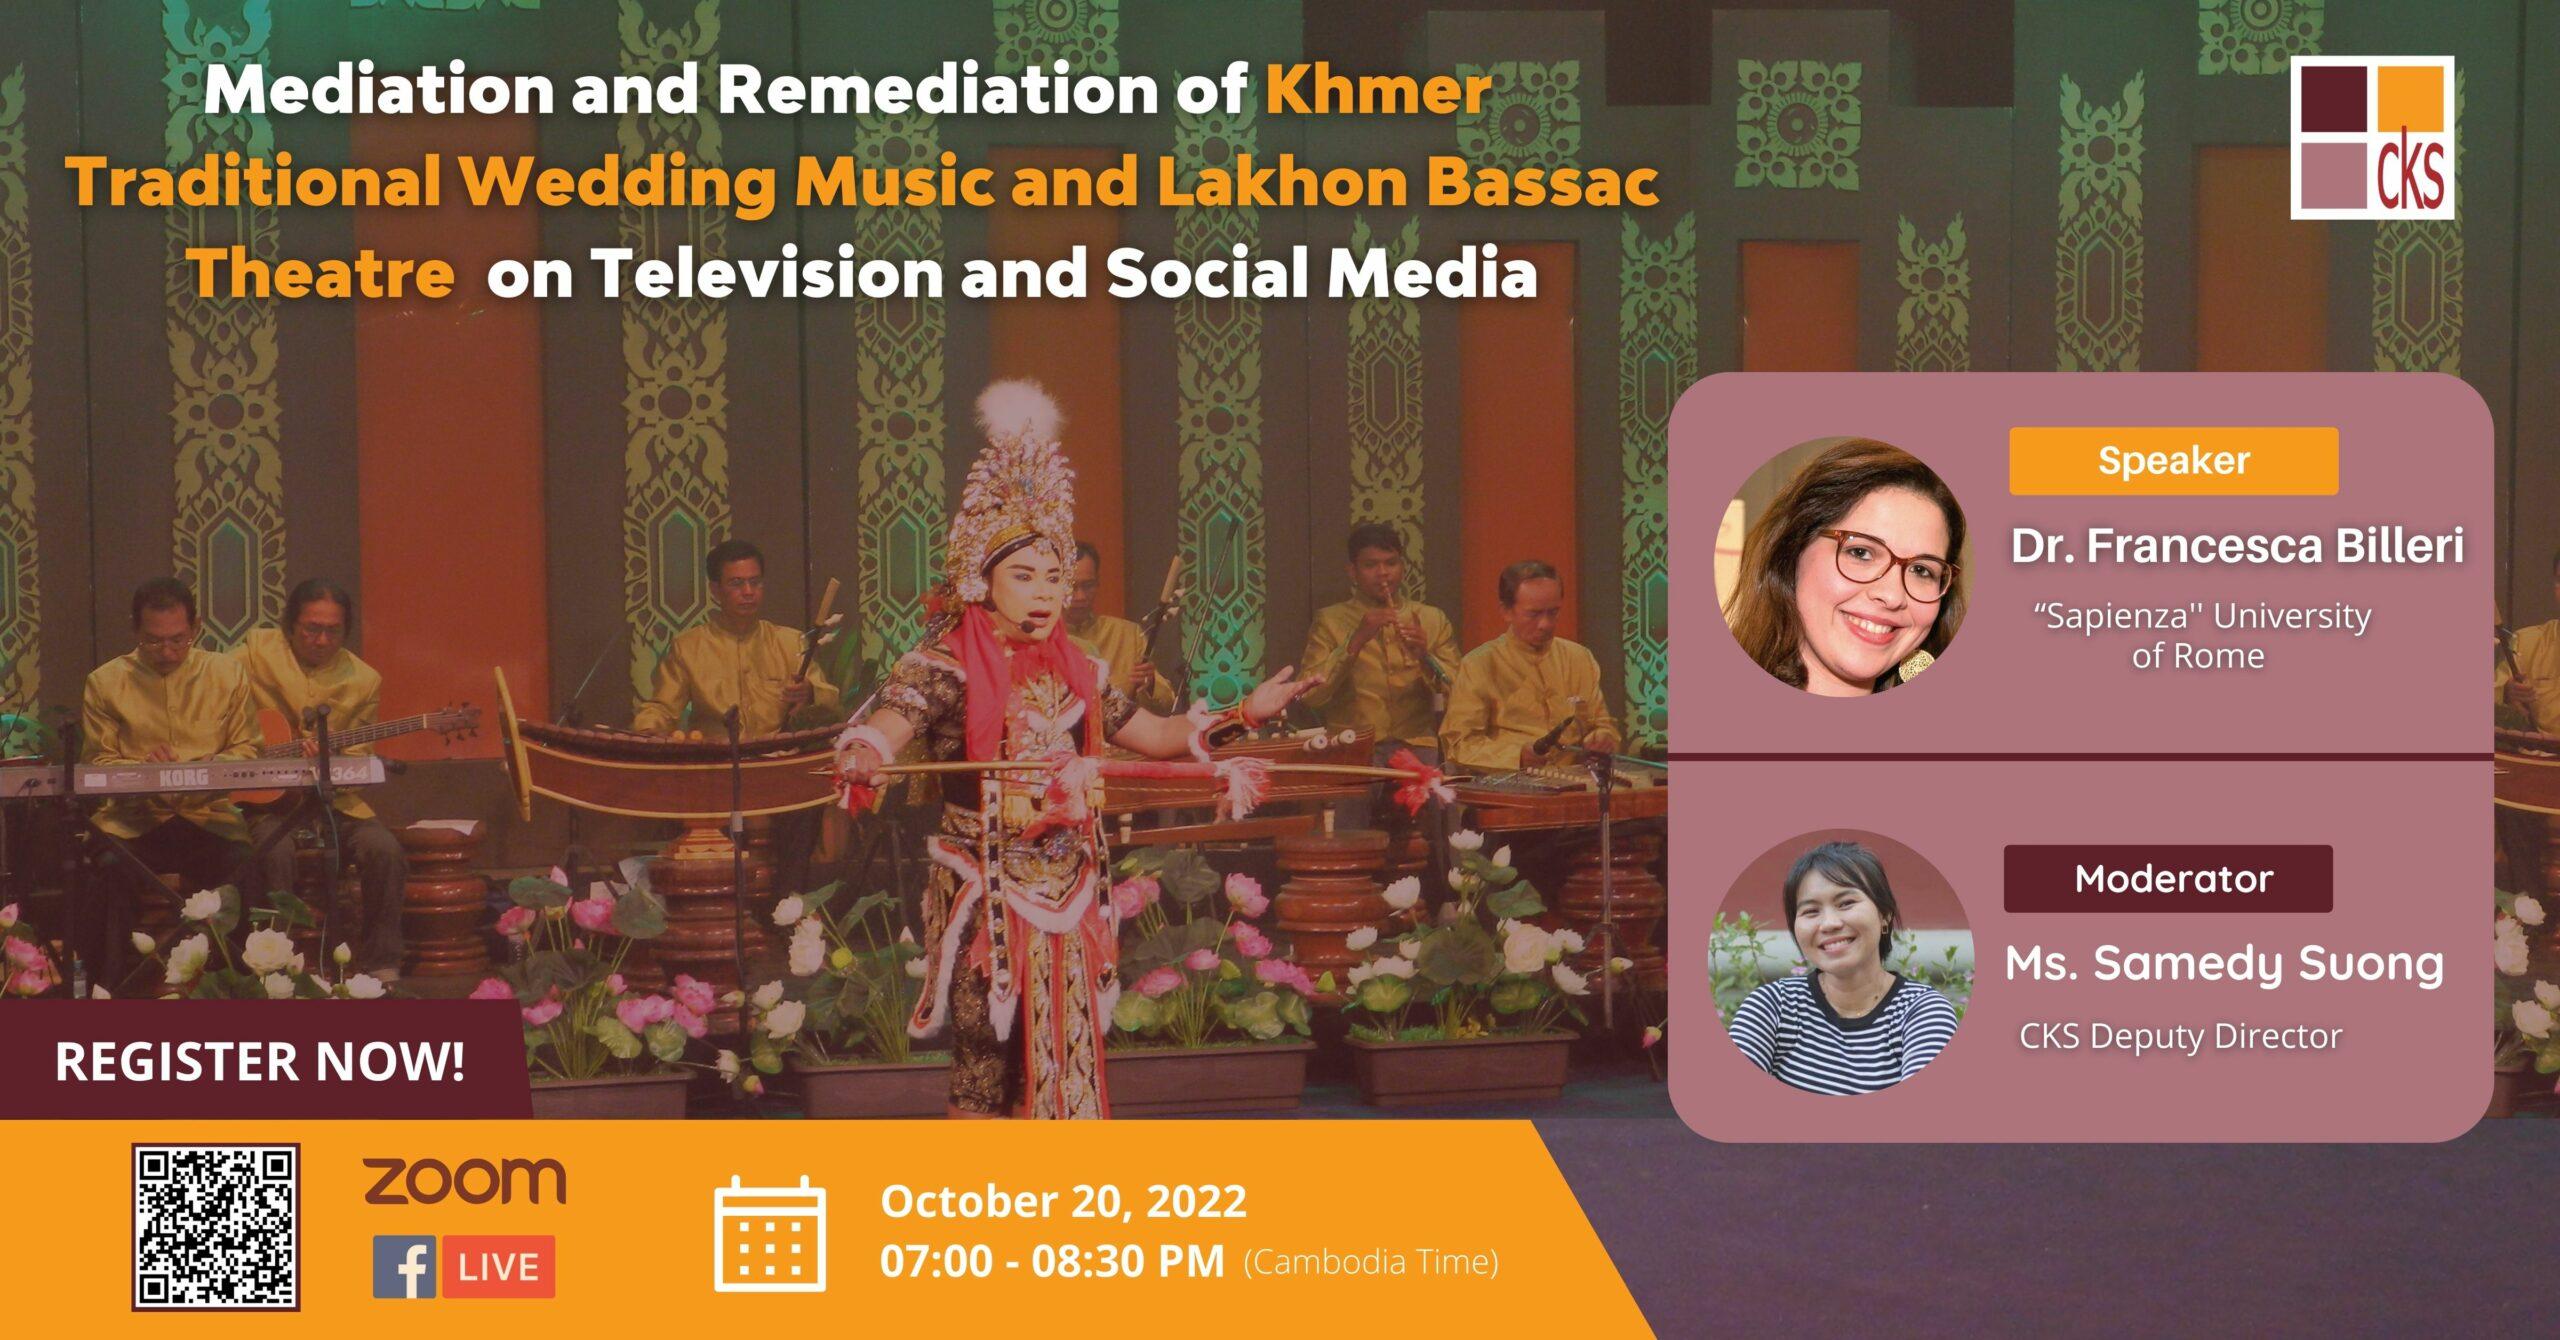 Mediation and Remediation of Khmer Traditional Wedding Music and Lakhon Bassac Theatre on Television and Social Media